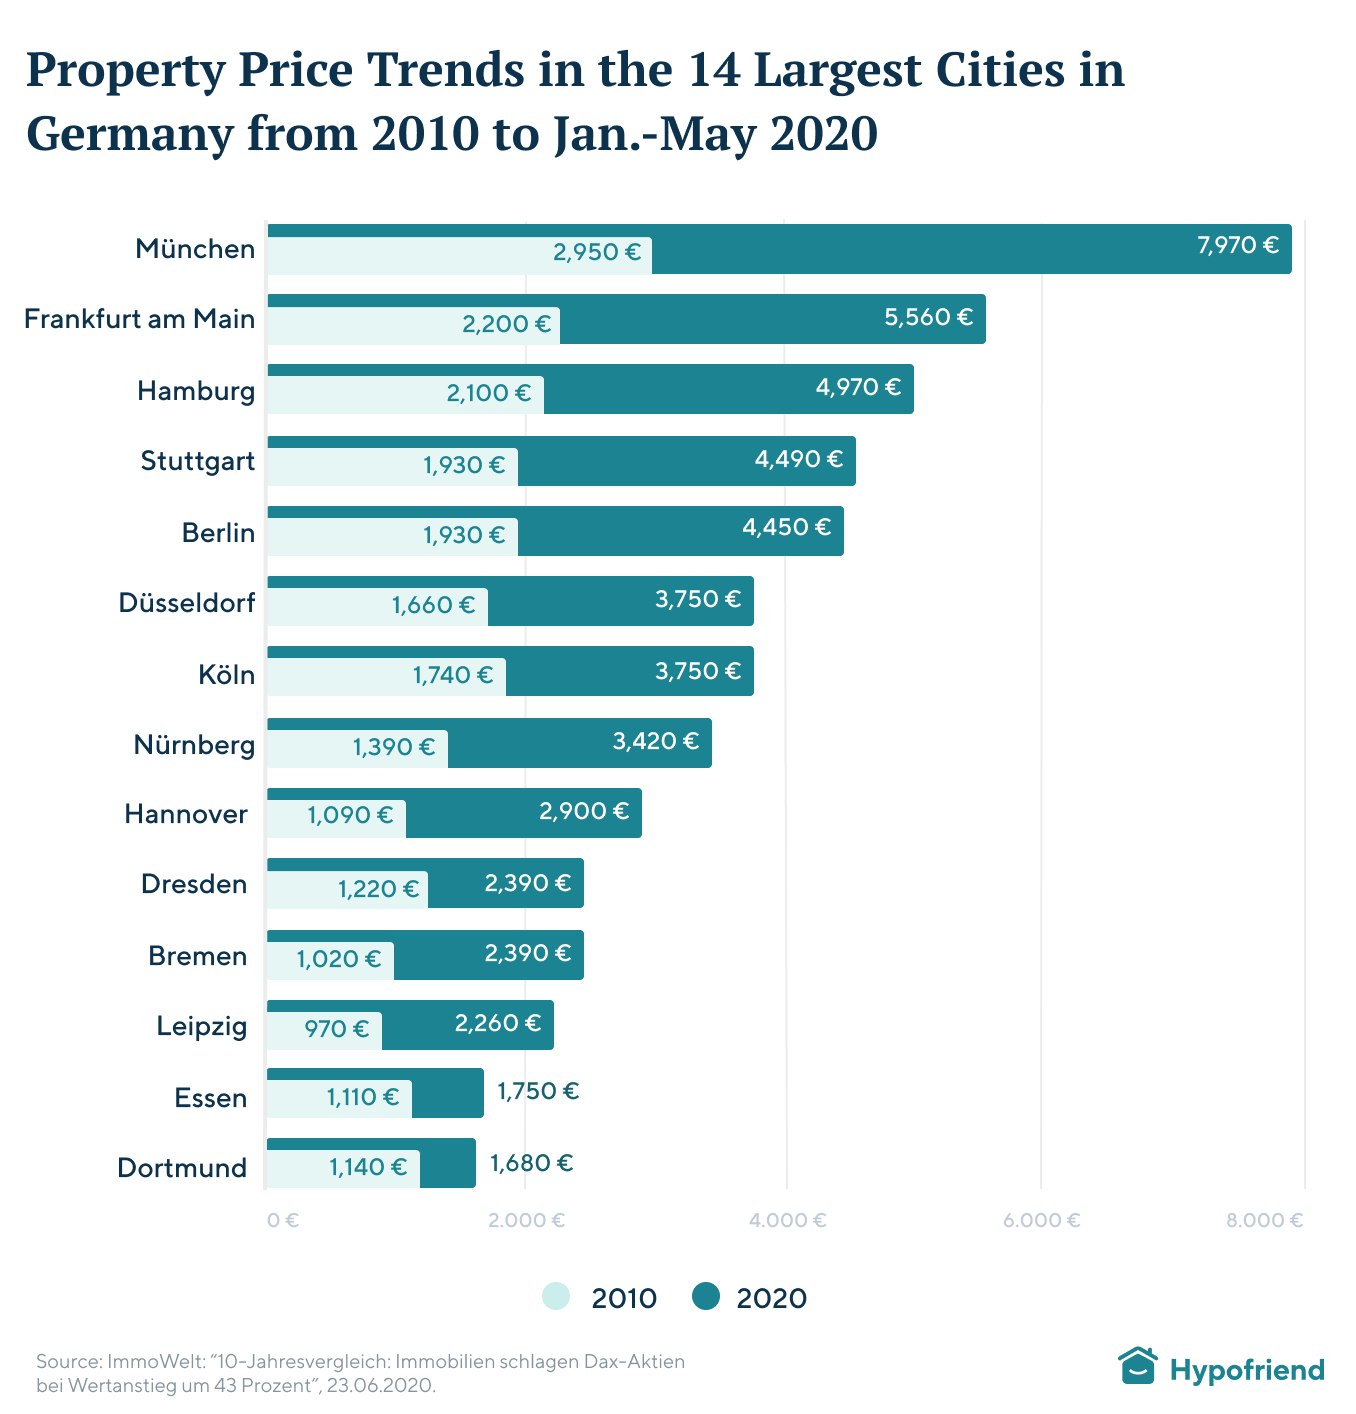 Property Price Trends in the 14 Largest Cities in Germany from 2010 to Jan.-May 2020